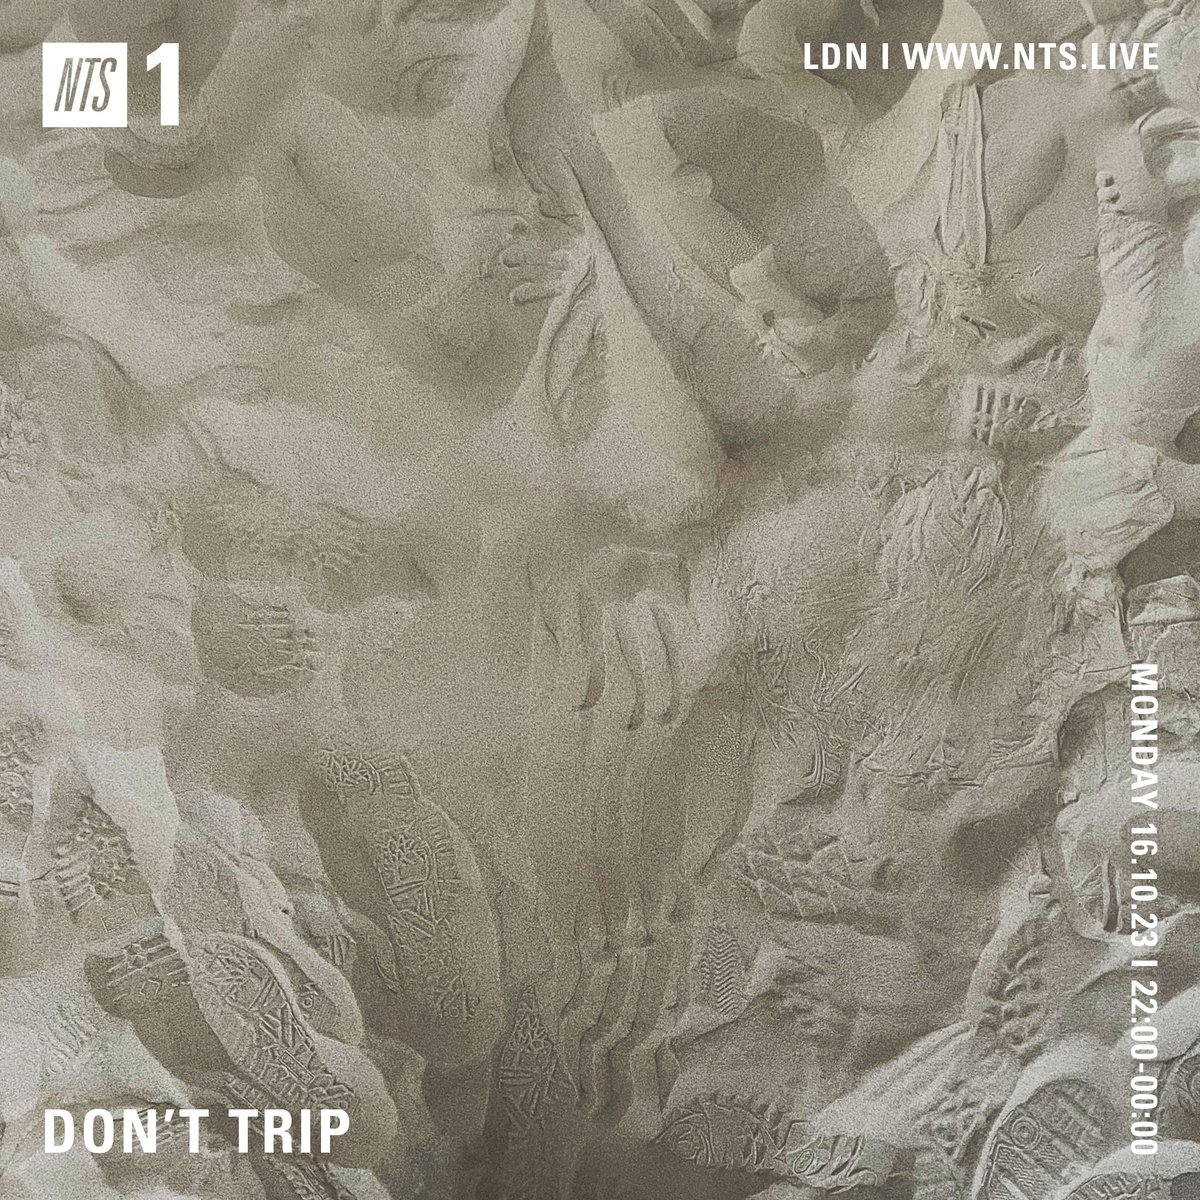 Lea Bertucci, Adela Mede, Celia Hollander + more on Don't Trip w/@mirroredpalm Live now at nts.live/1